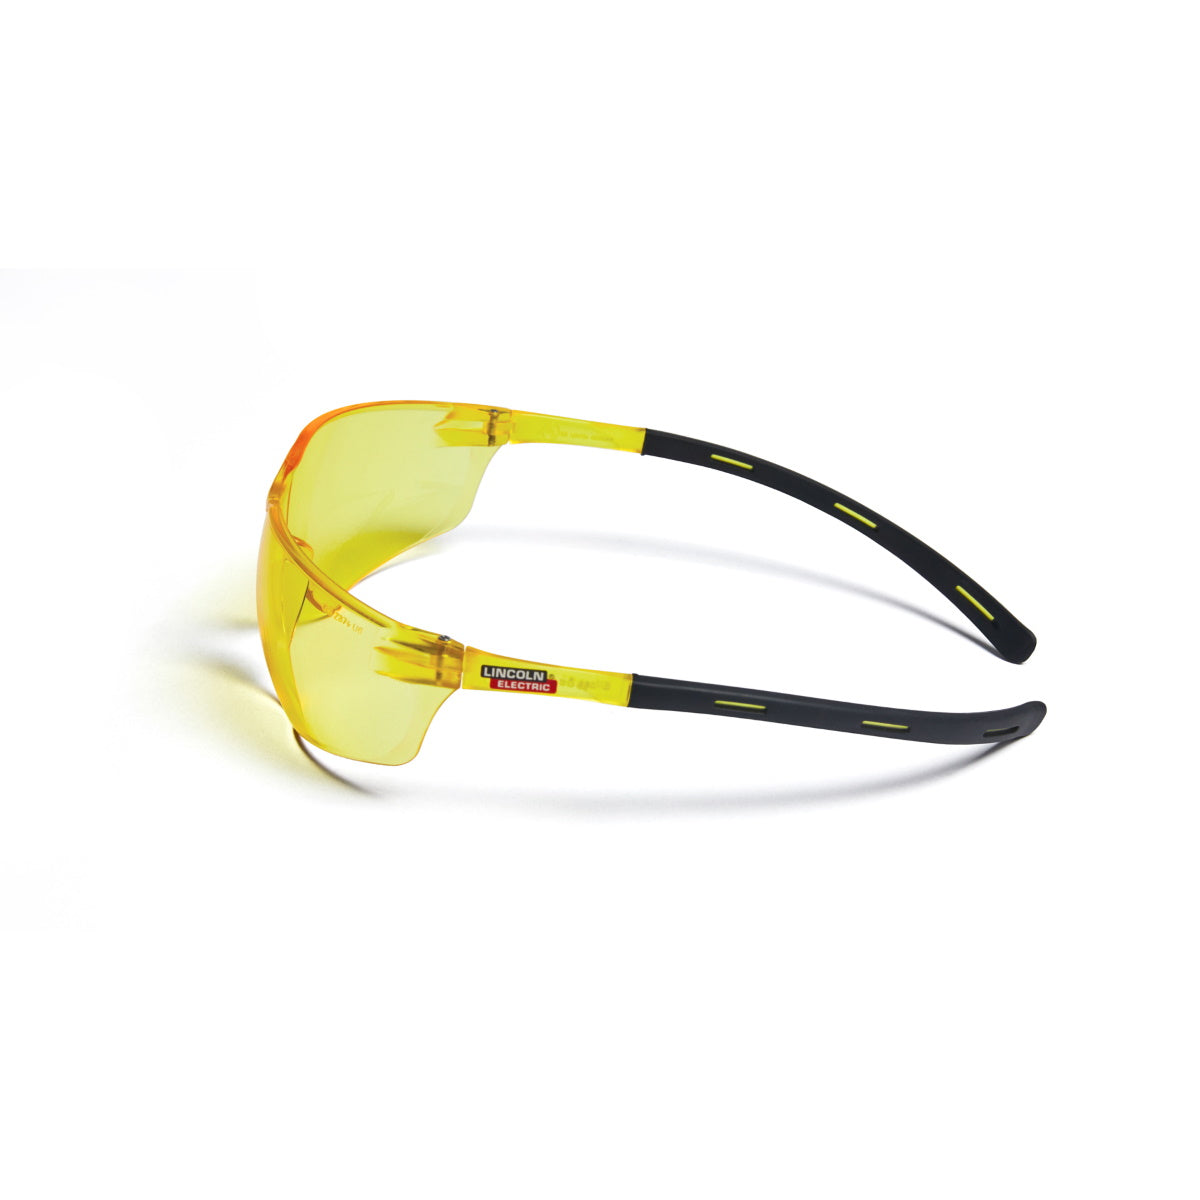 Lincoln Axilite Amber Anti-Fog/Scratch Safety Glasses (K4674-1)